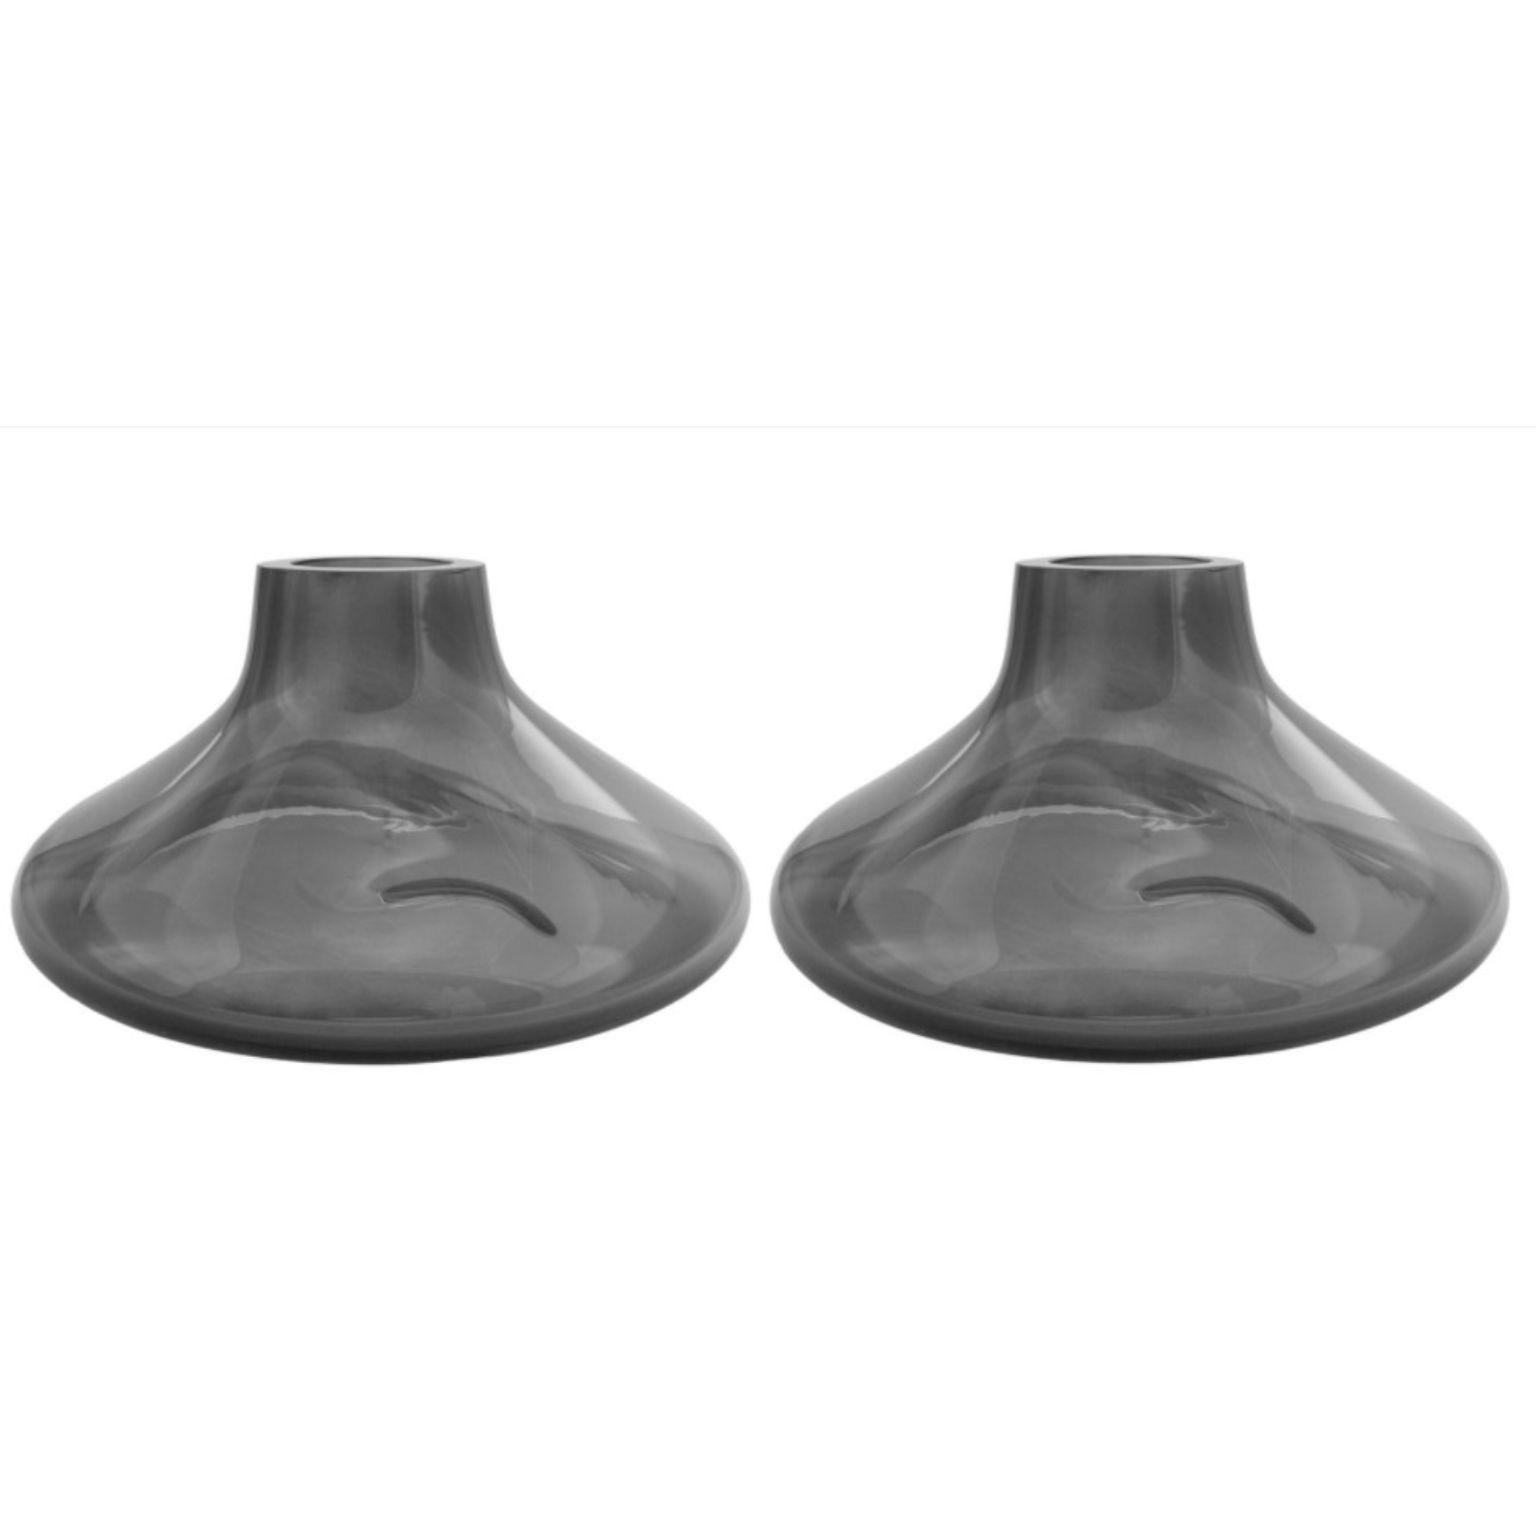 Set of 2 Makemake silver smoke l vase + bowl by Eloa.
No UL listed 
Material: Glass.
Dimensions: D 40 x W 40 x H 25 cm.
Also available in different colours and dimensions.

Makemake is reminiscent of Jupiter‘s ring. The object was designed with a